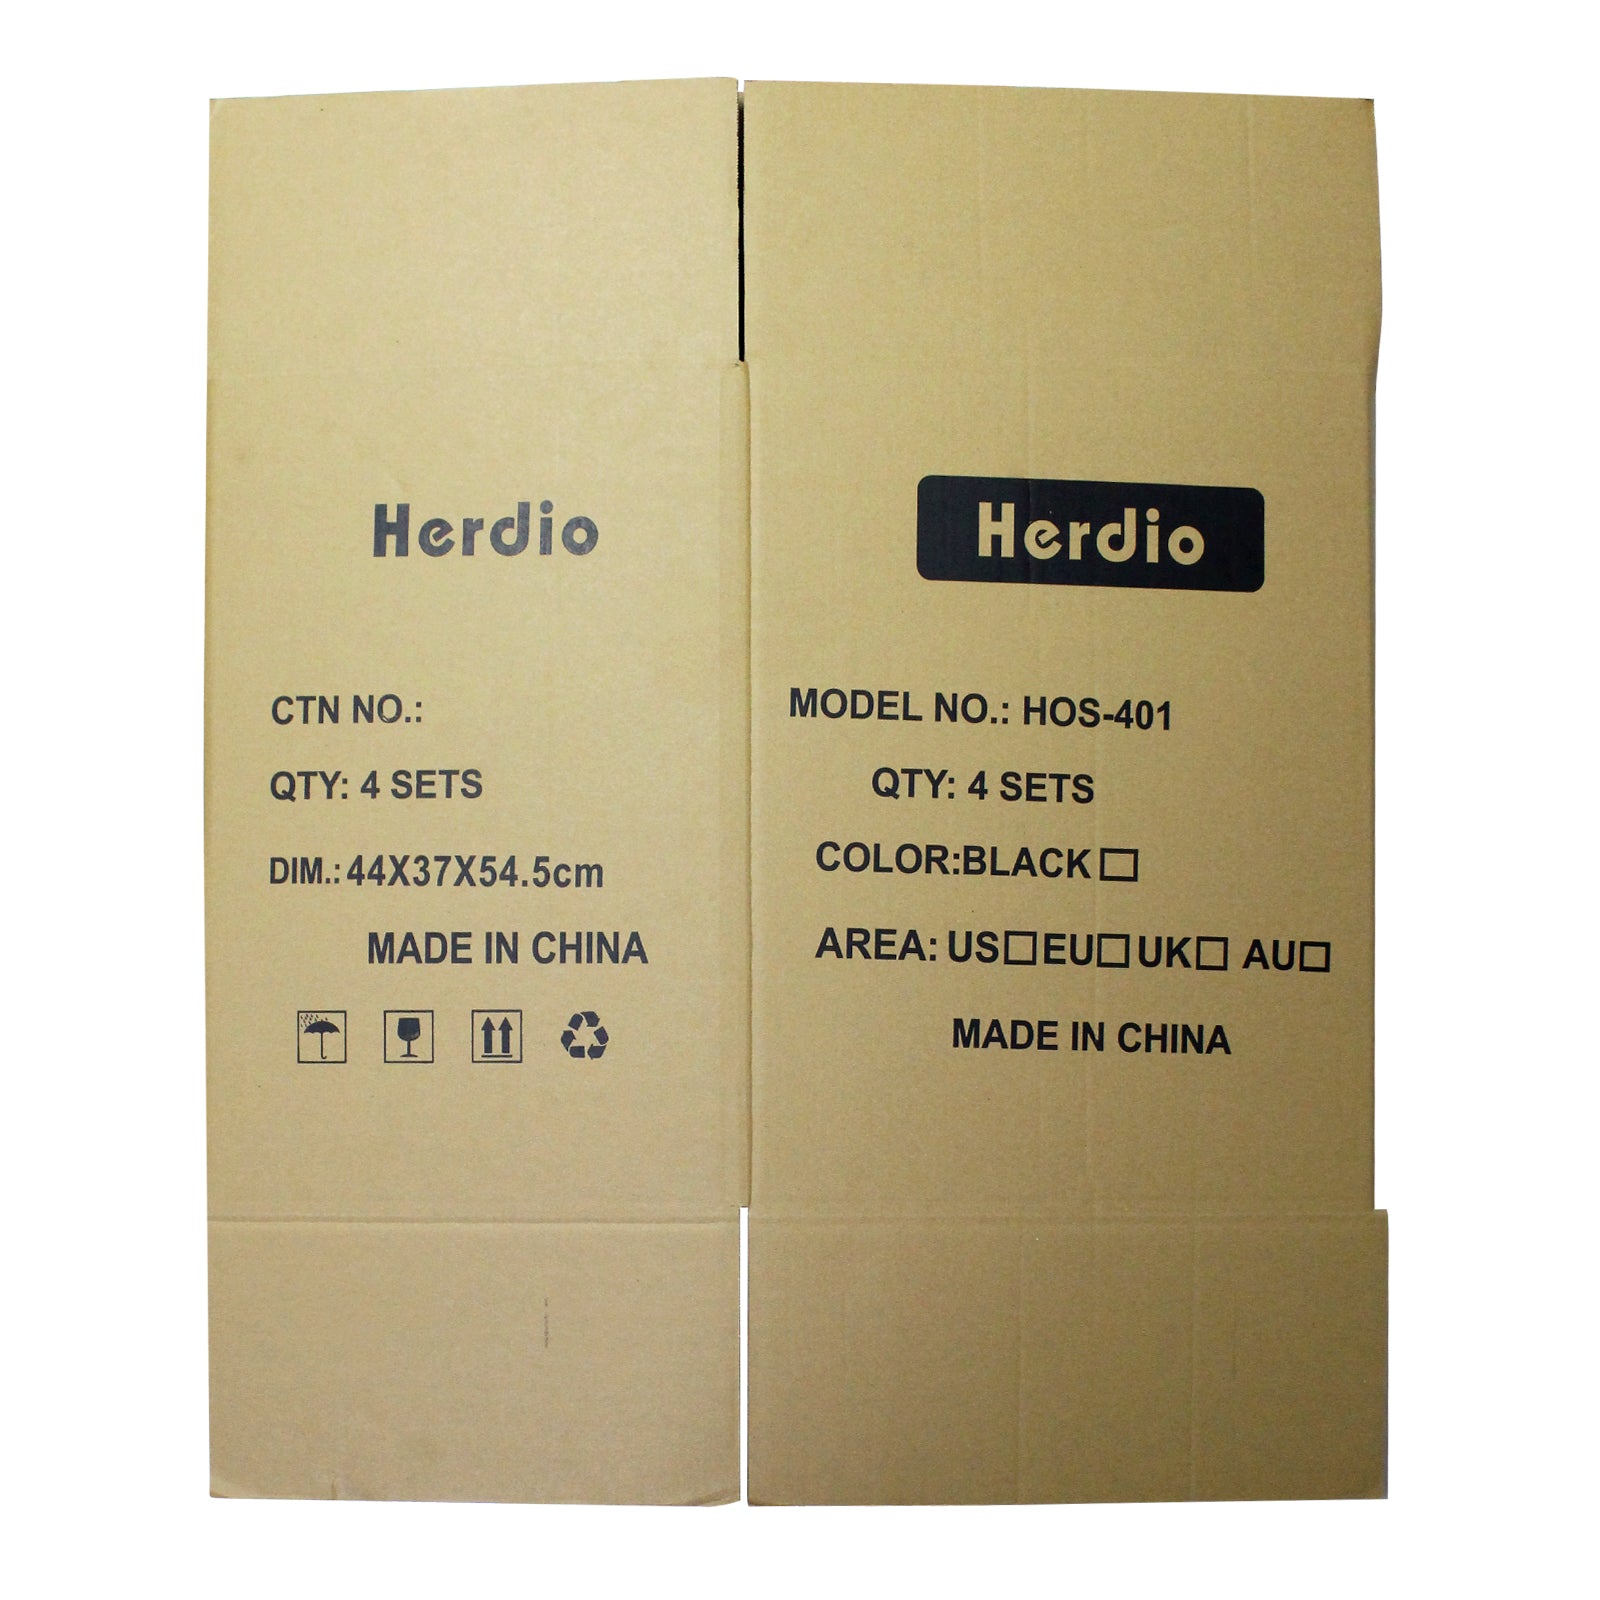 Herdio Shipping Boxes 44*37*54.5 CM Small Corrugated Cardboard Boxes,1 Pack - Herdio